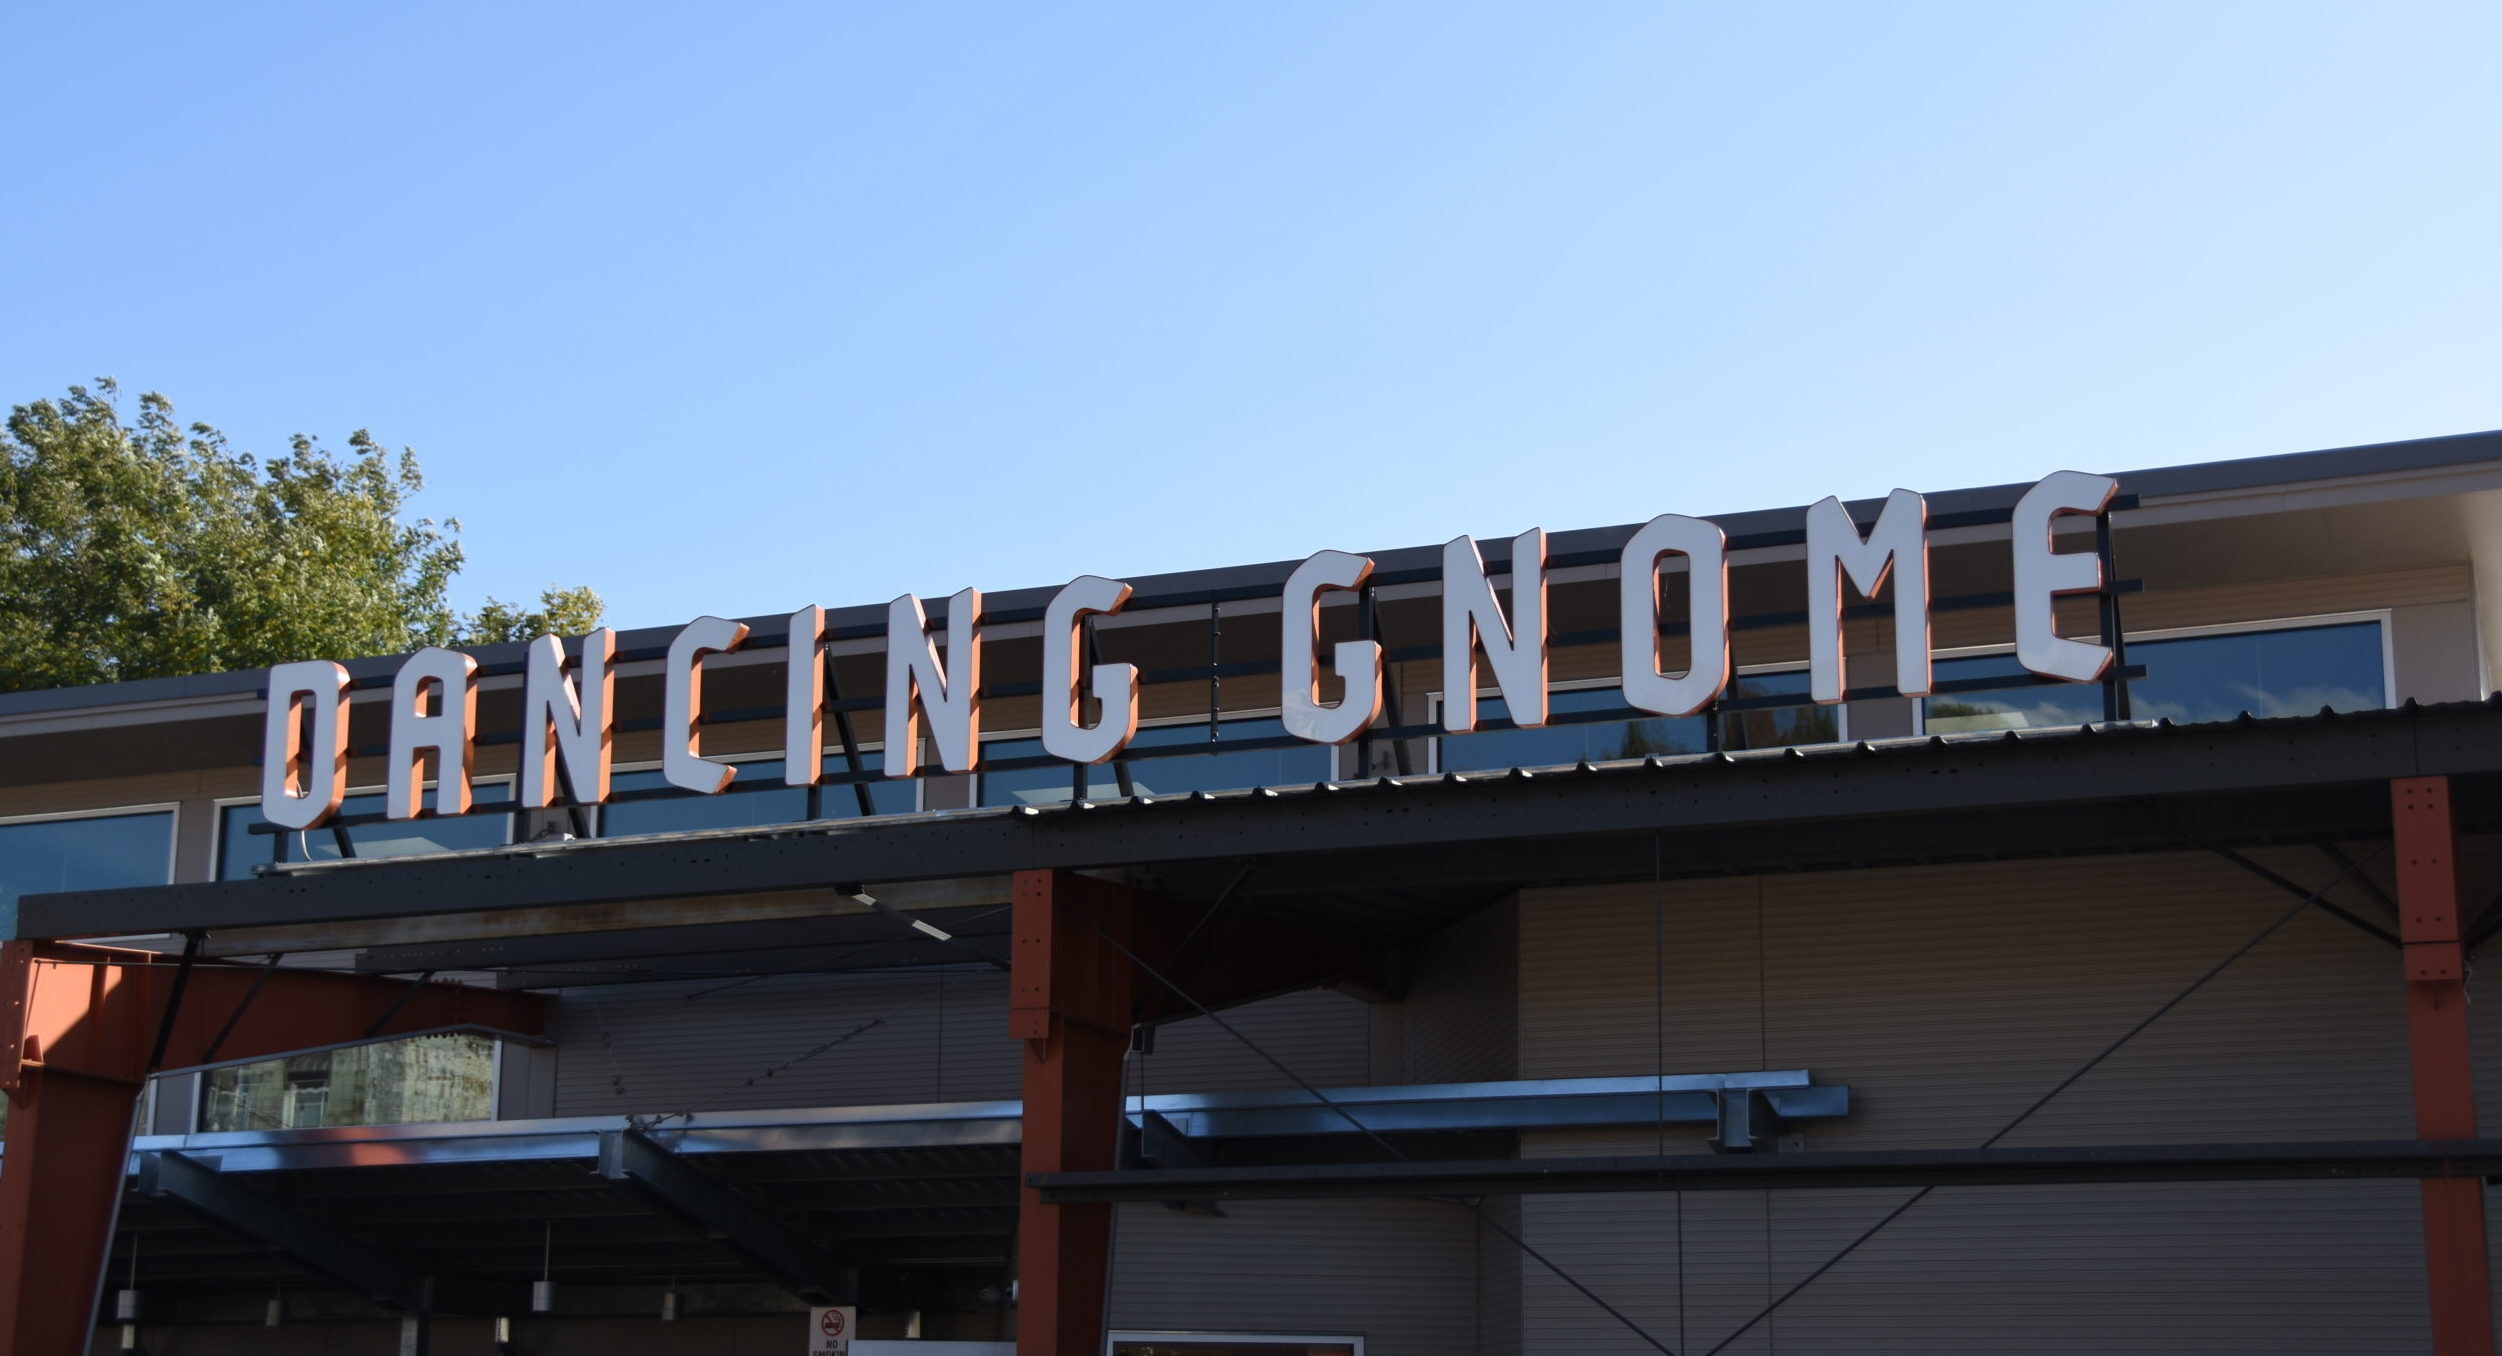 Dancing Gnome Brewery